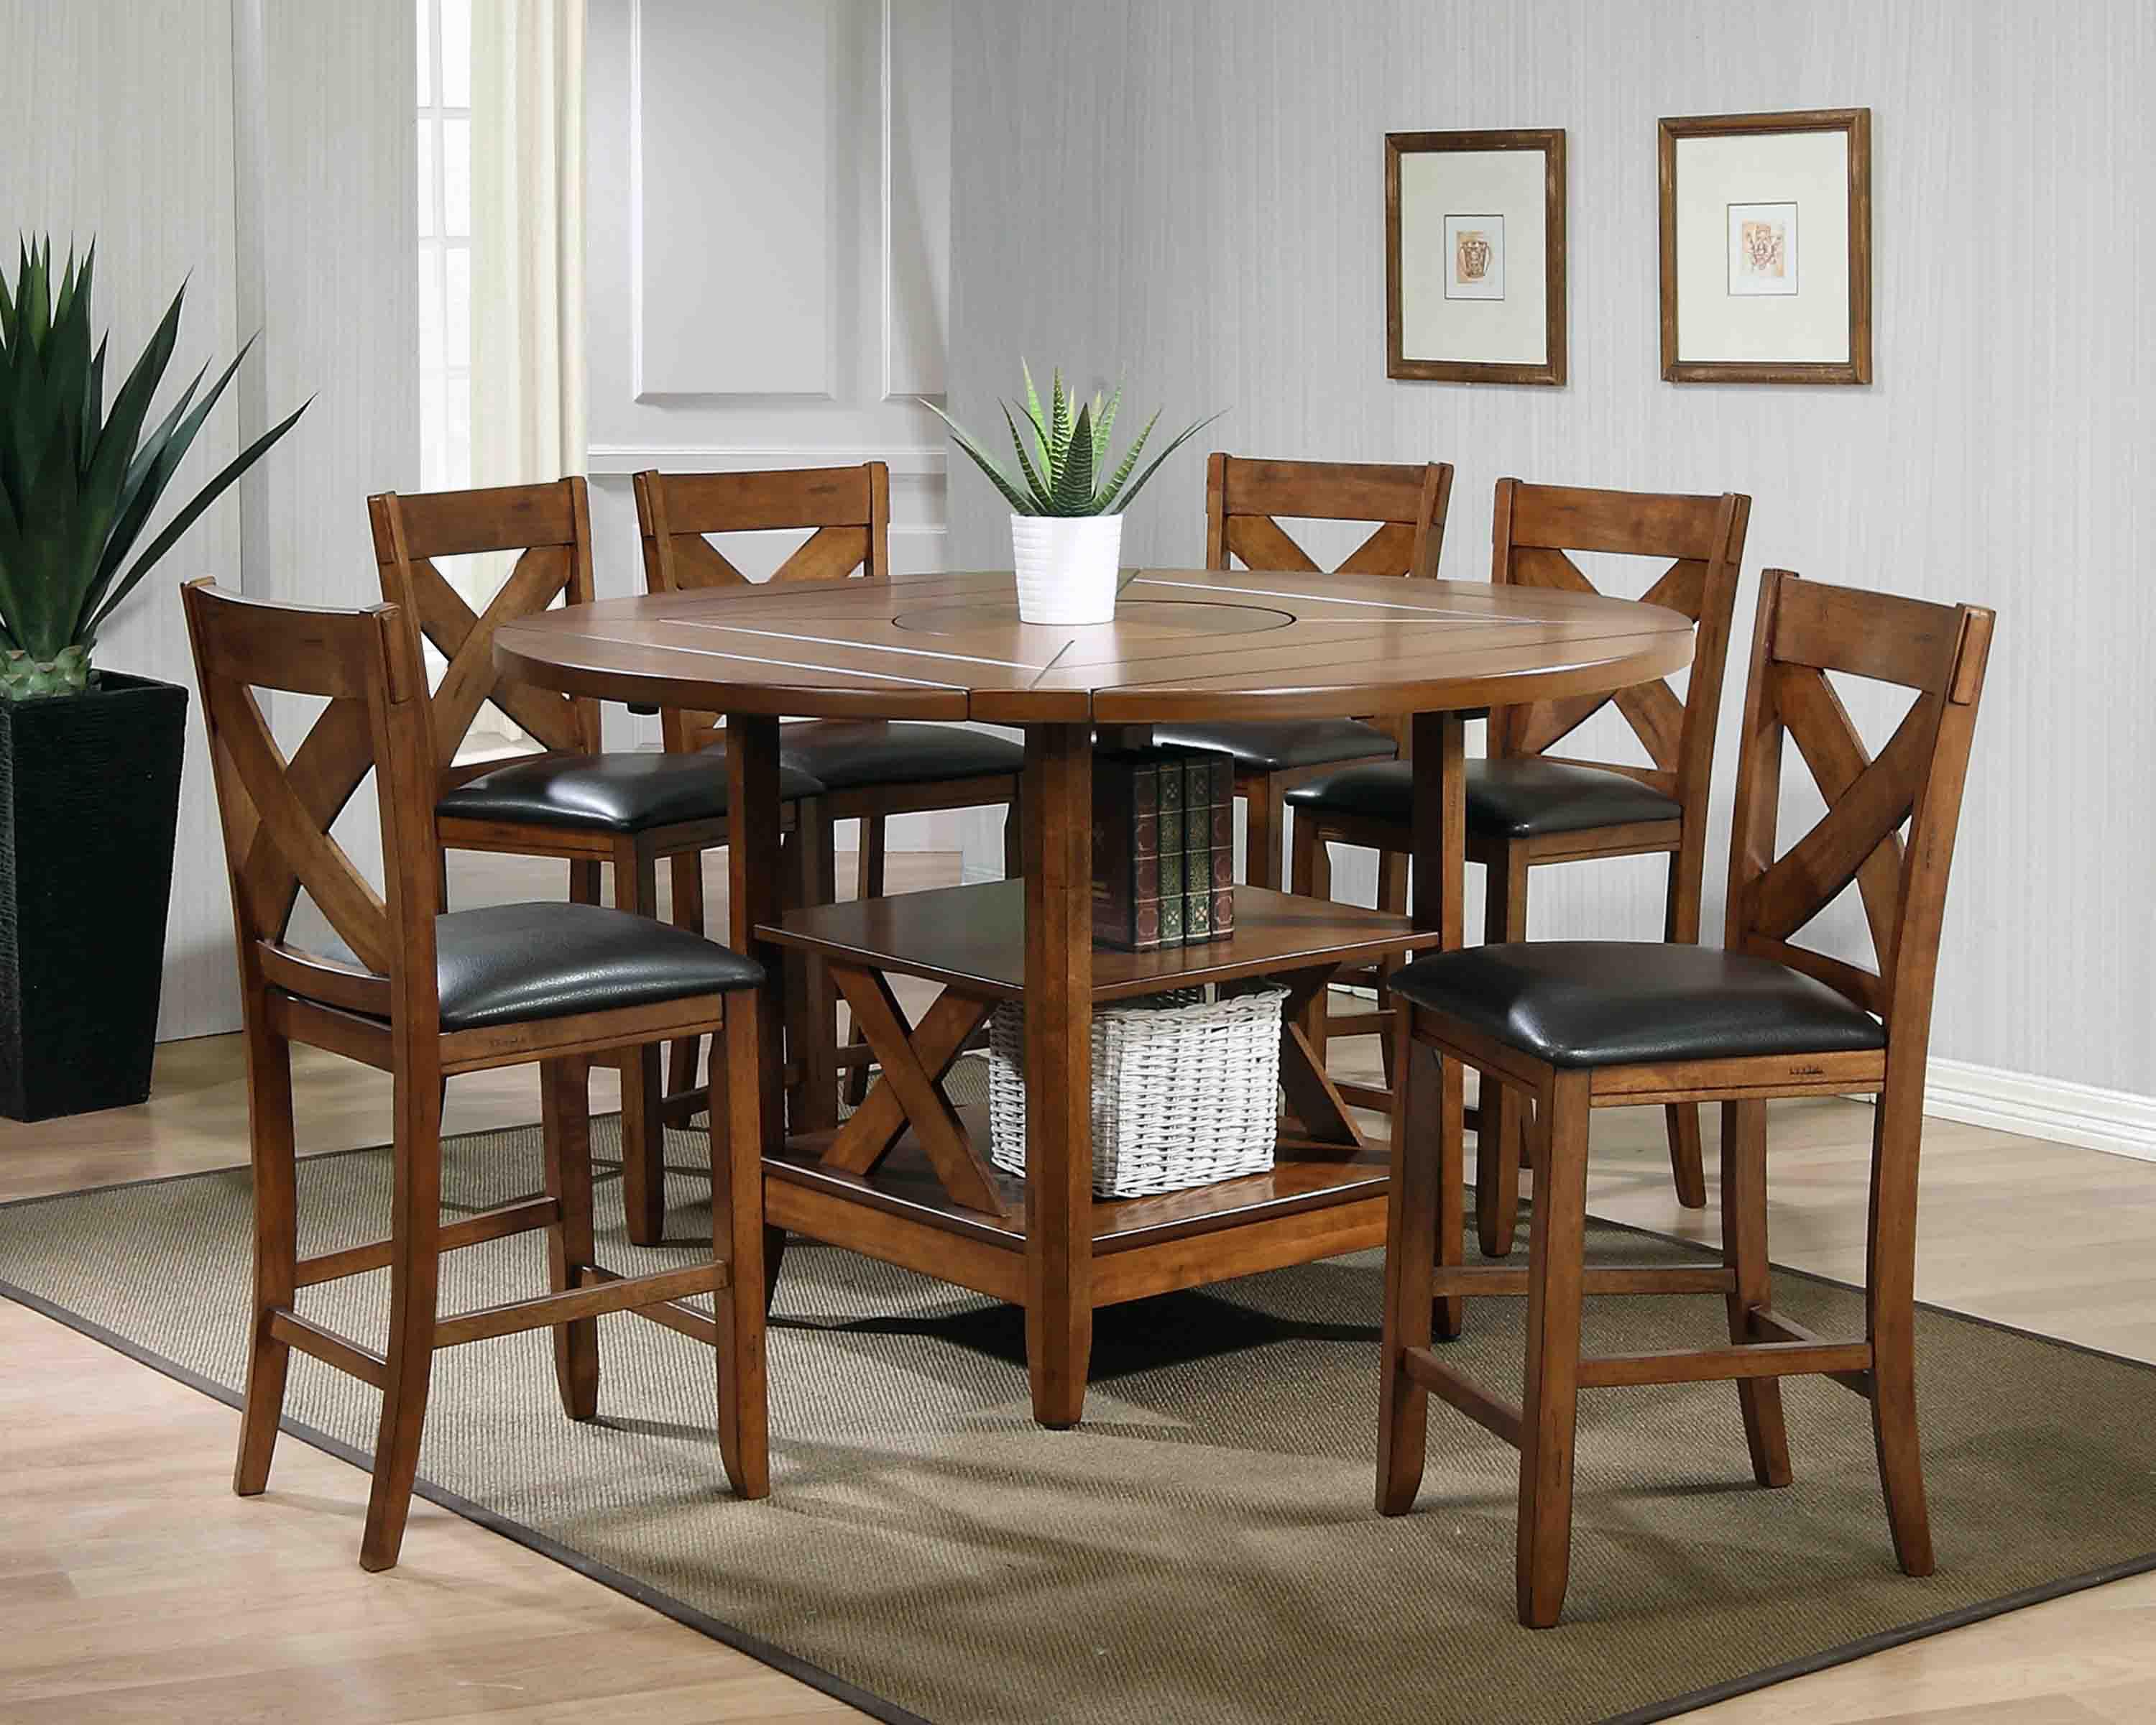 Contemporary, Transitional Dining Sets ALOD4660 ALOD4660 - Dining Set-7 in Black, Cherry Polyurethane